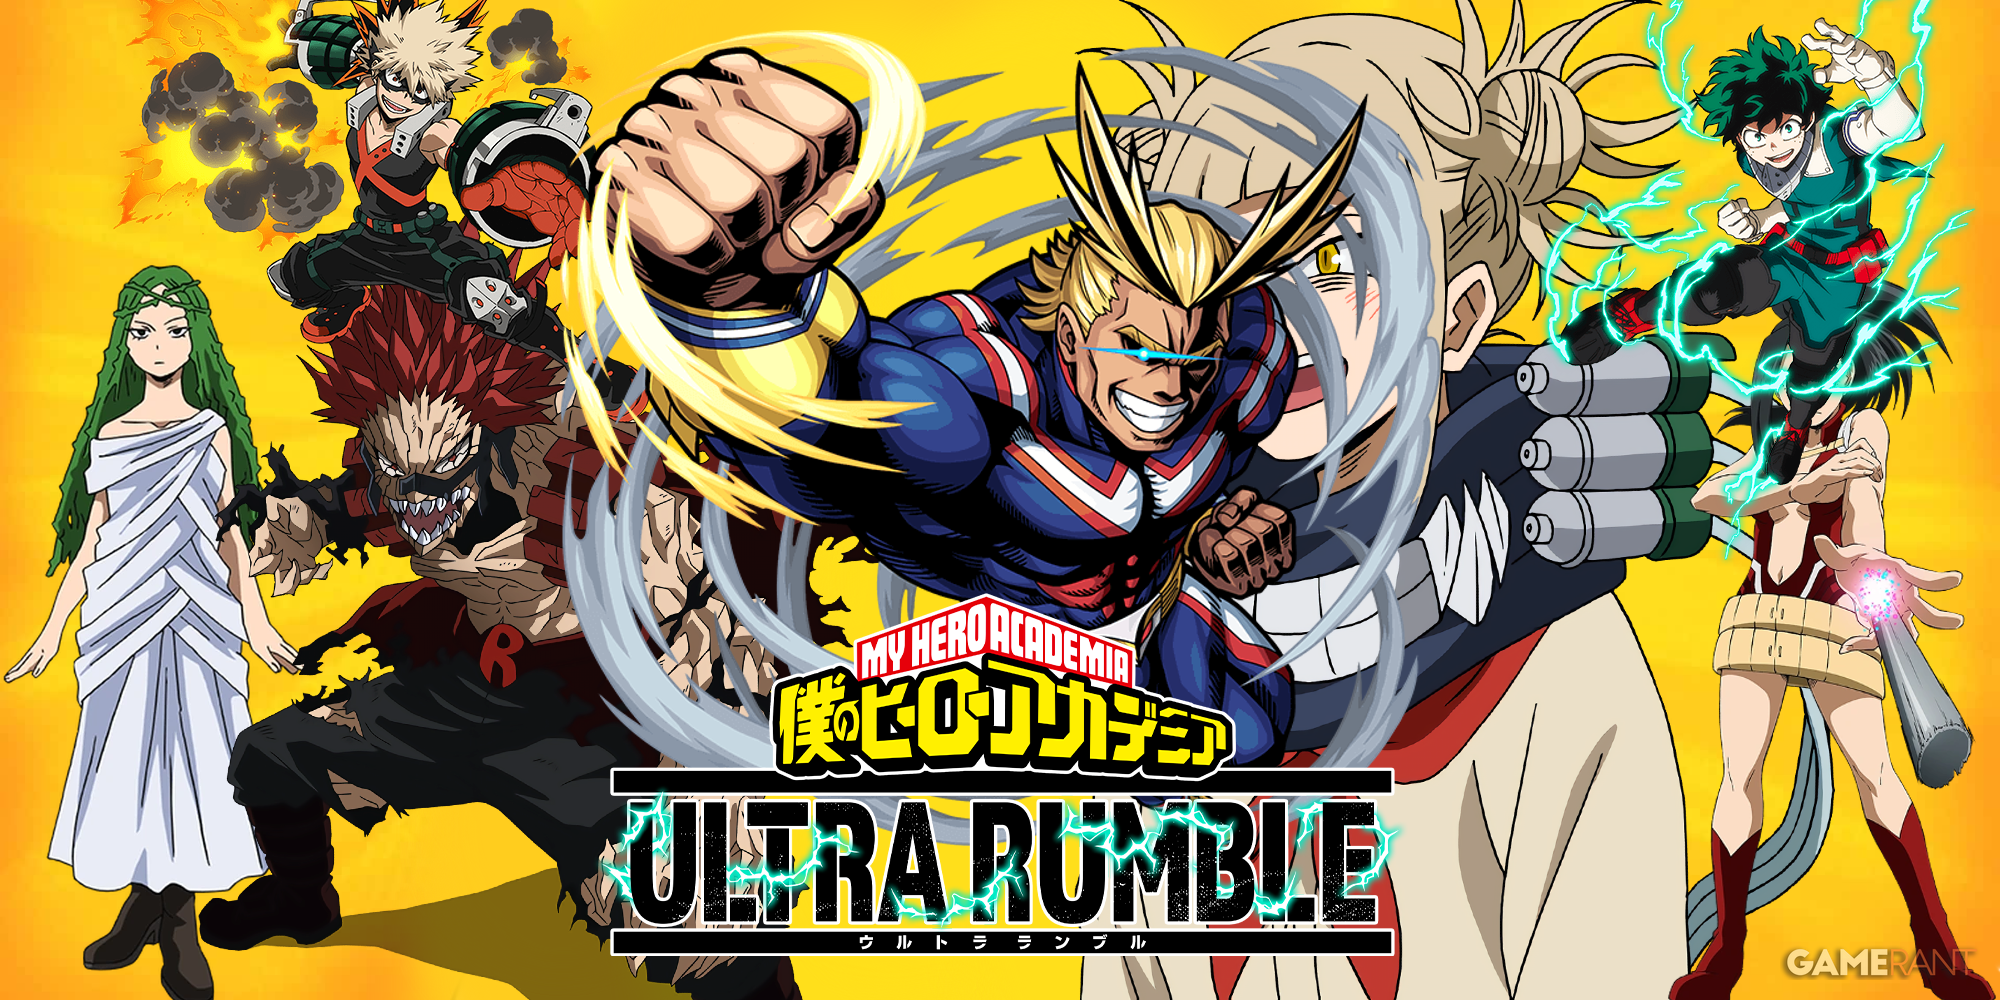 MY HERO ULTRA RUMBLE for Nintendo Switch - Nintendo Official Site